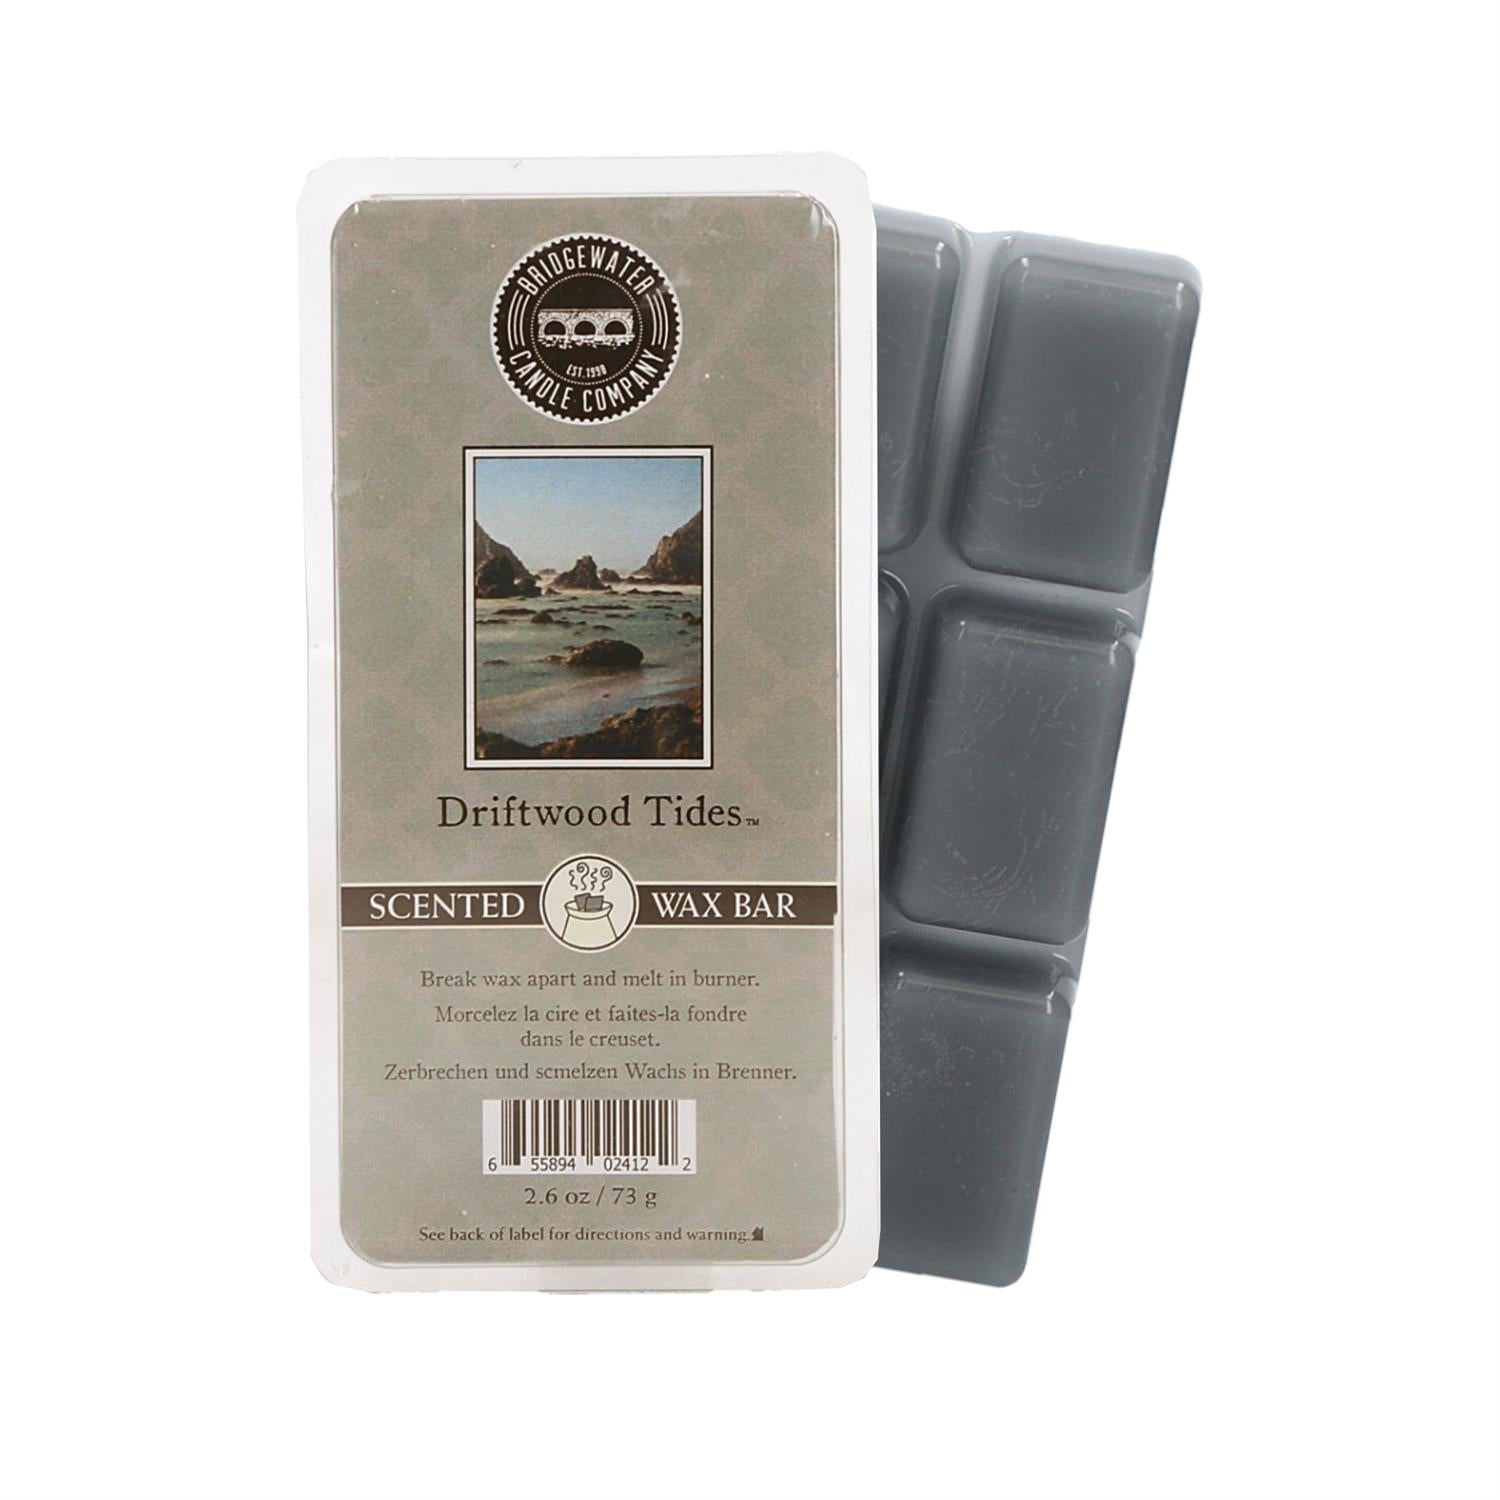 Scented Wax Bar Driftwood Tides